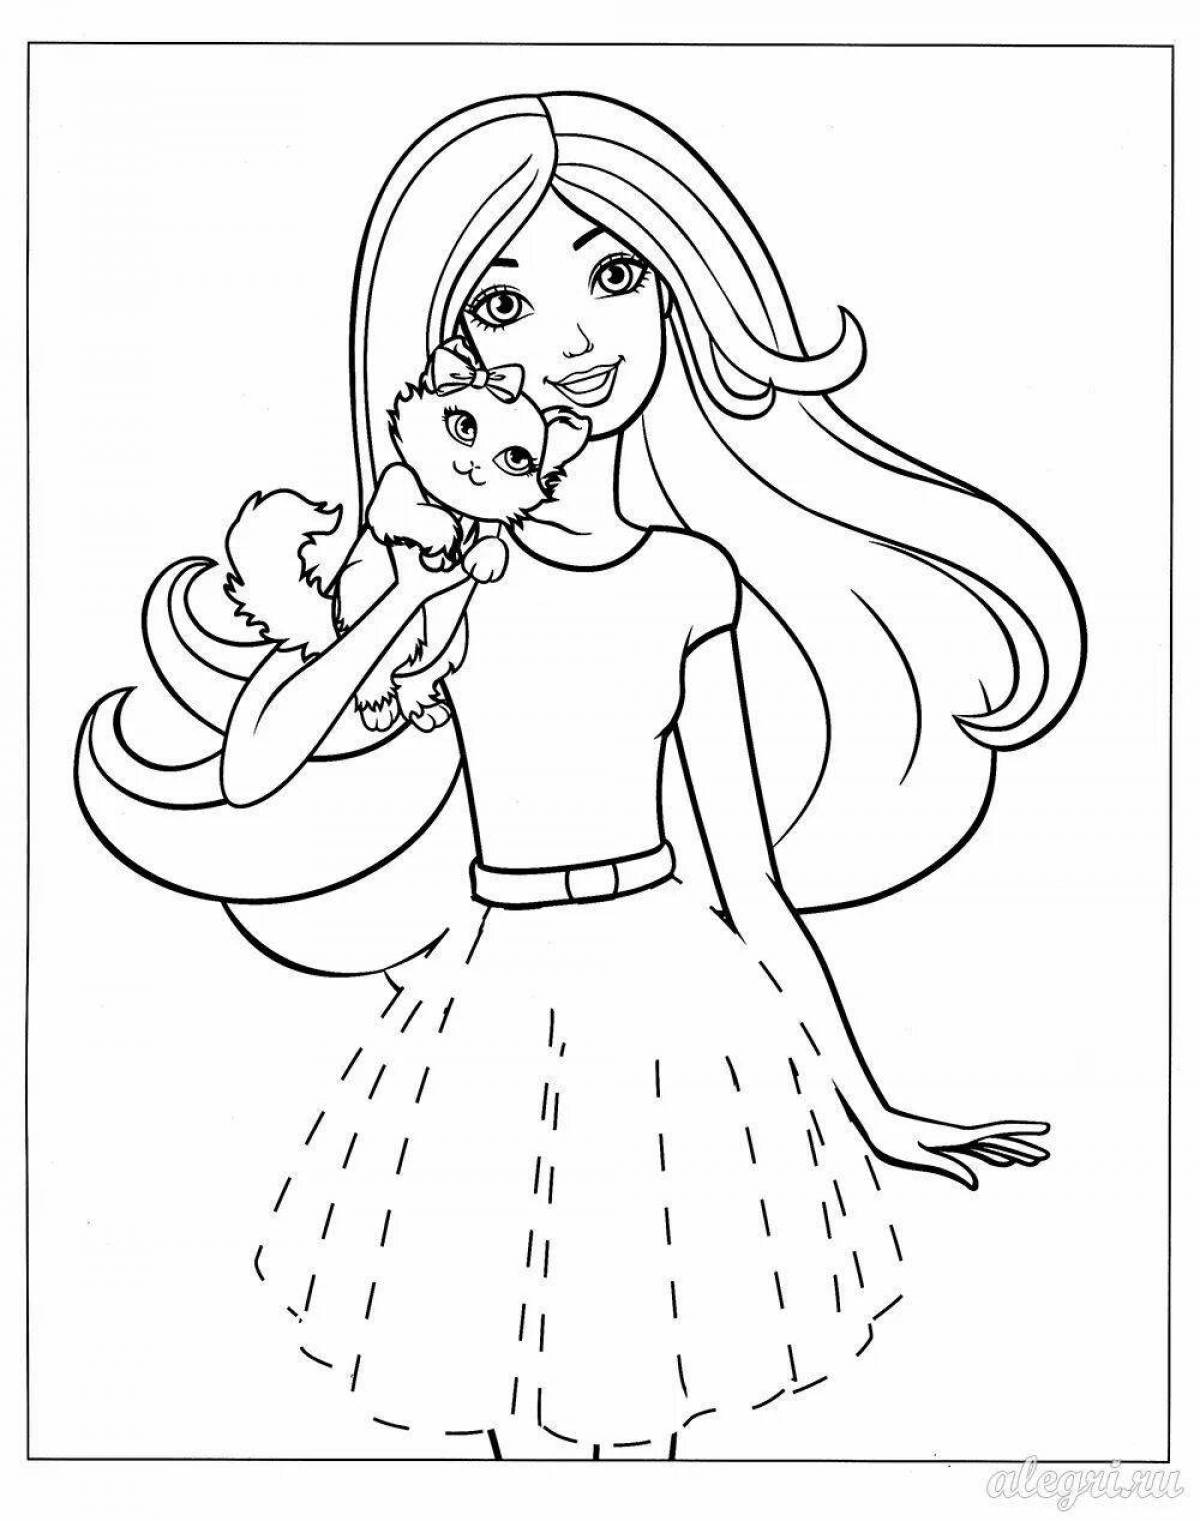 Fairy Alice coloring pages for girls